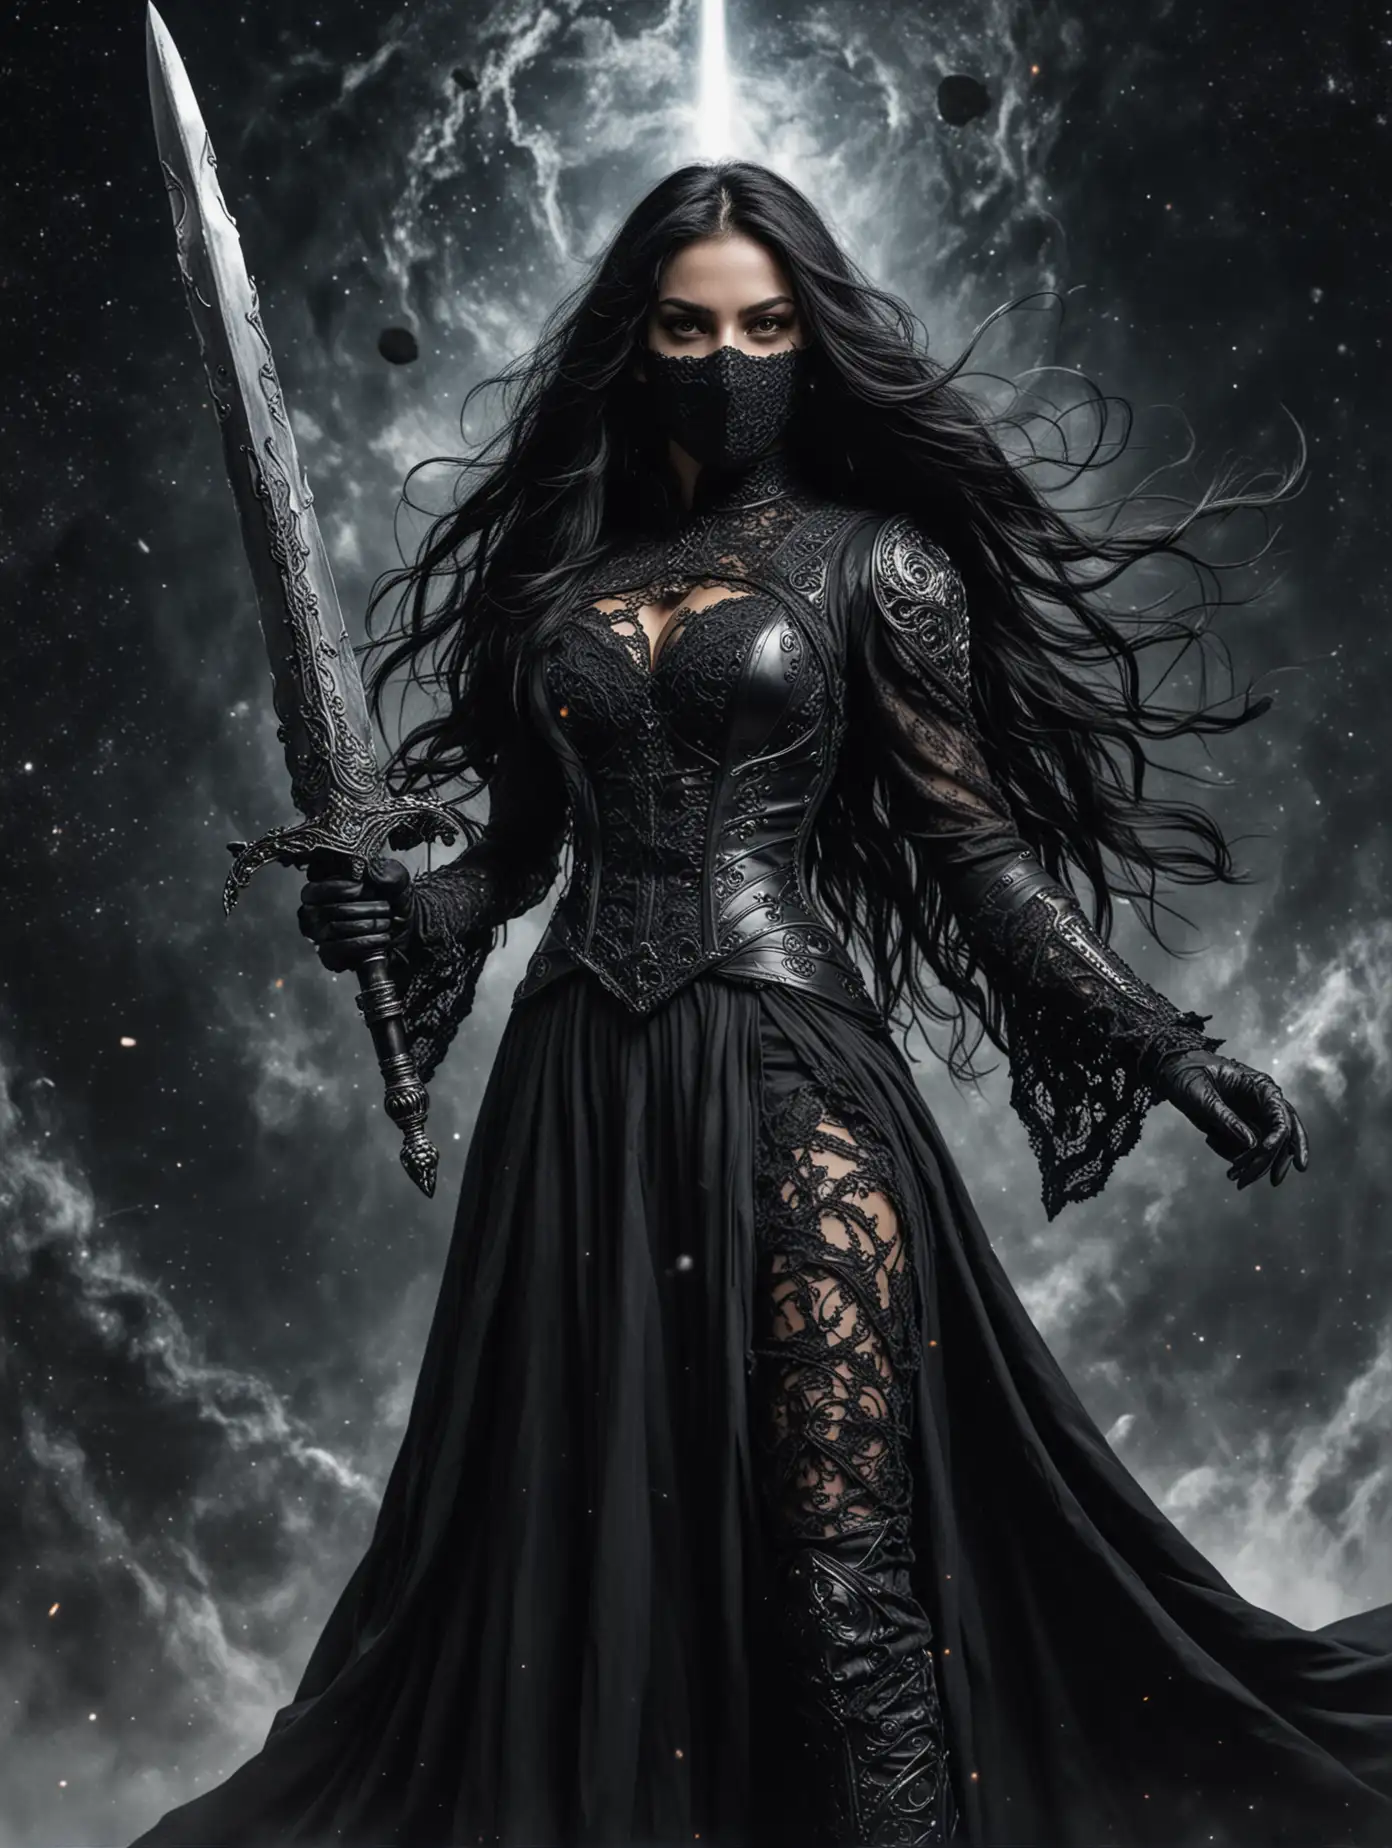 Mysterious-Military-Woman-with-Flowing-Black-Hair-and-Sword-in-Space